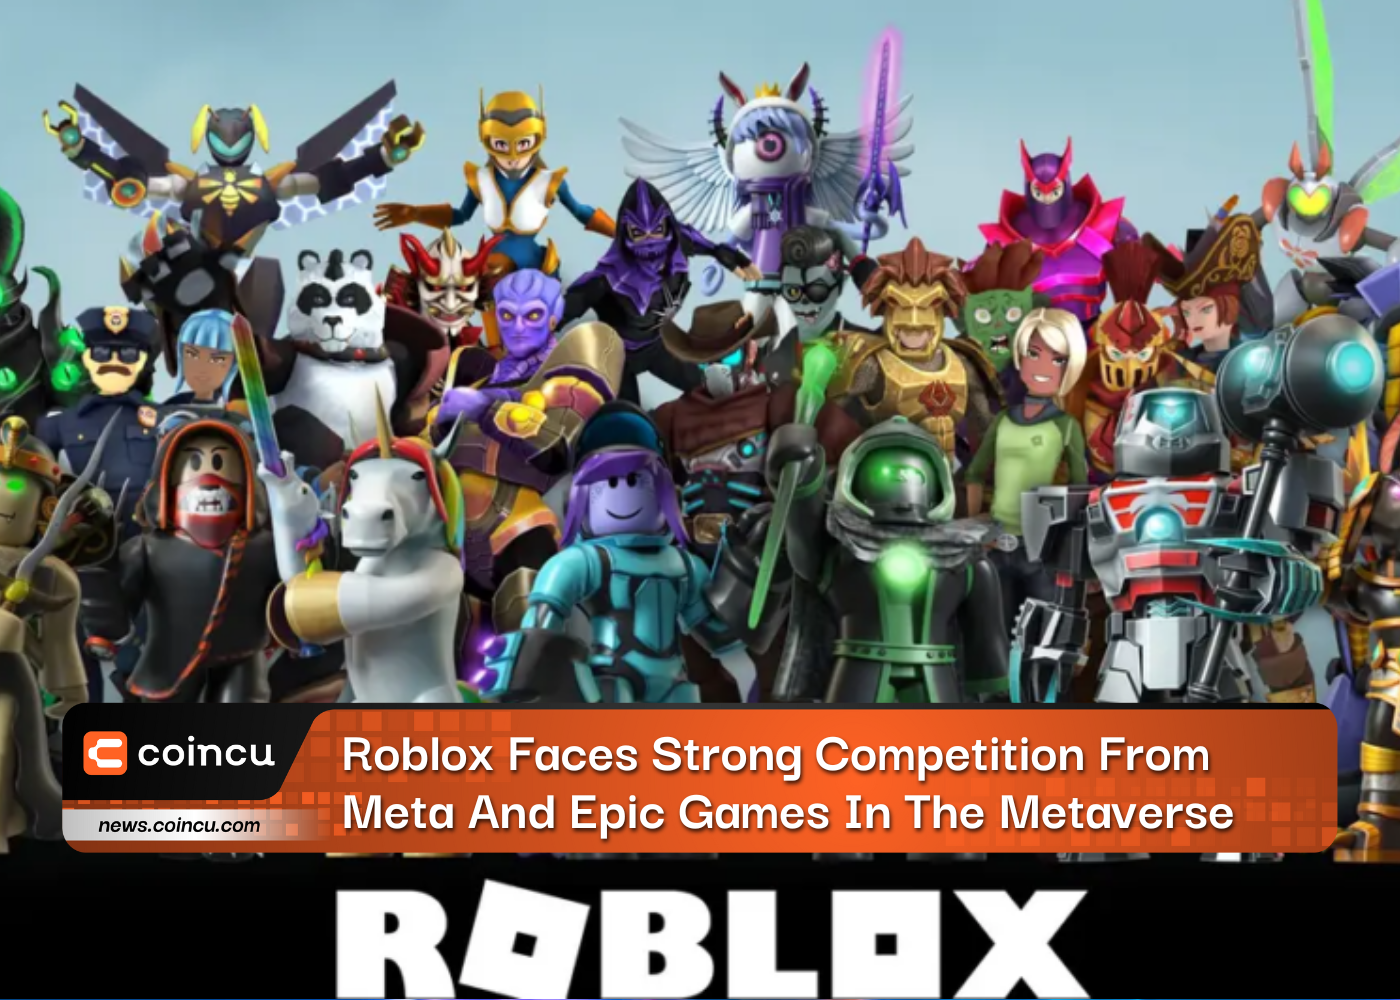 Roblox Faces Strong Competition From Meta And Epic Games In The Metaverse